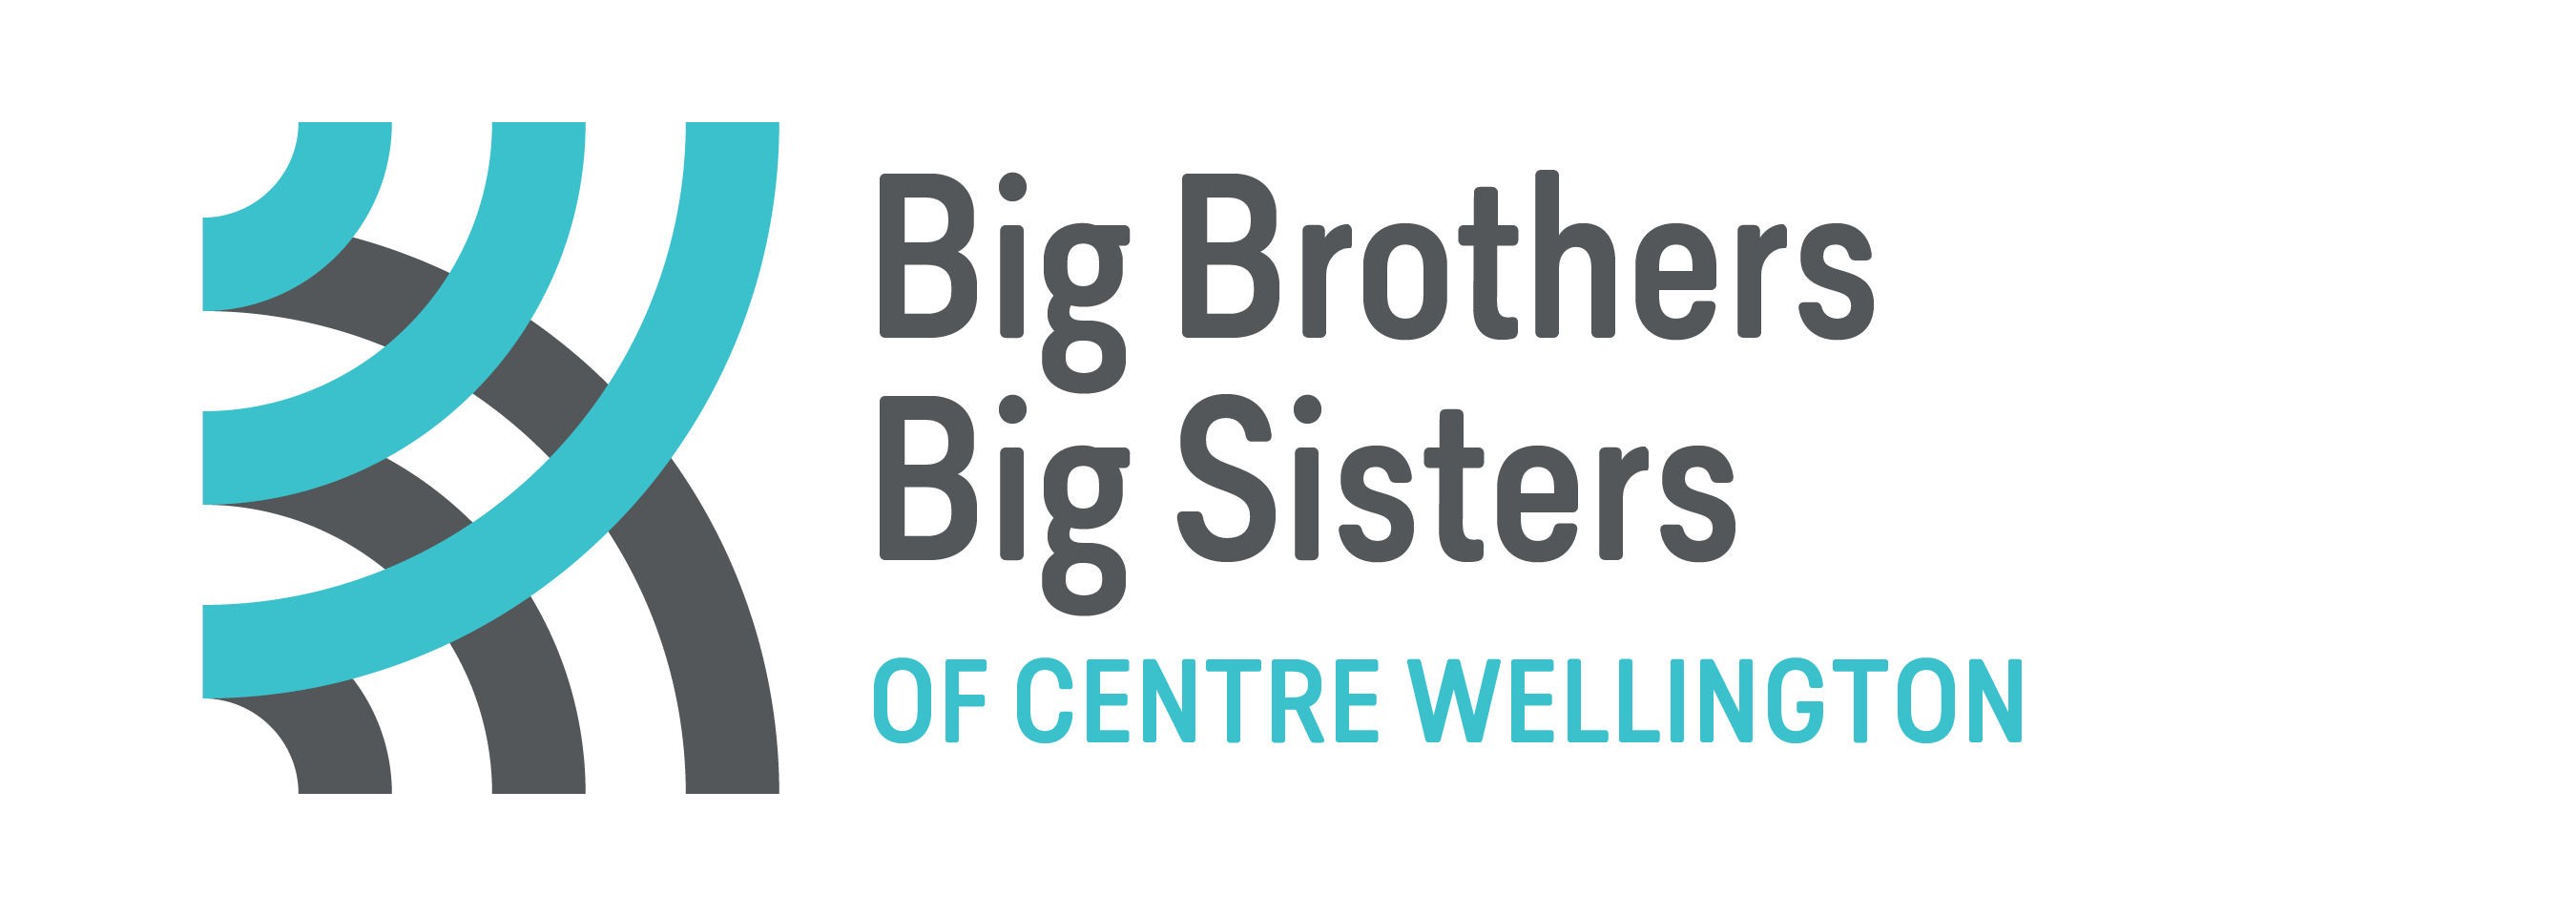 Big Brothers Big Sisters of Centre Wellington